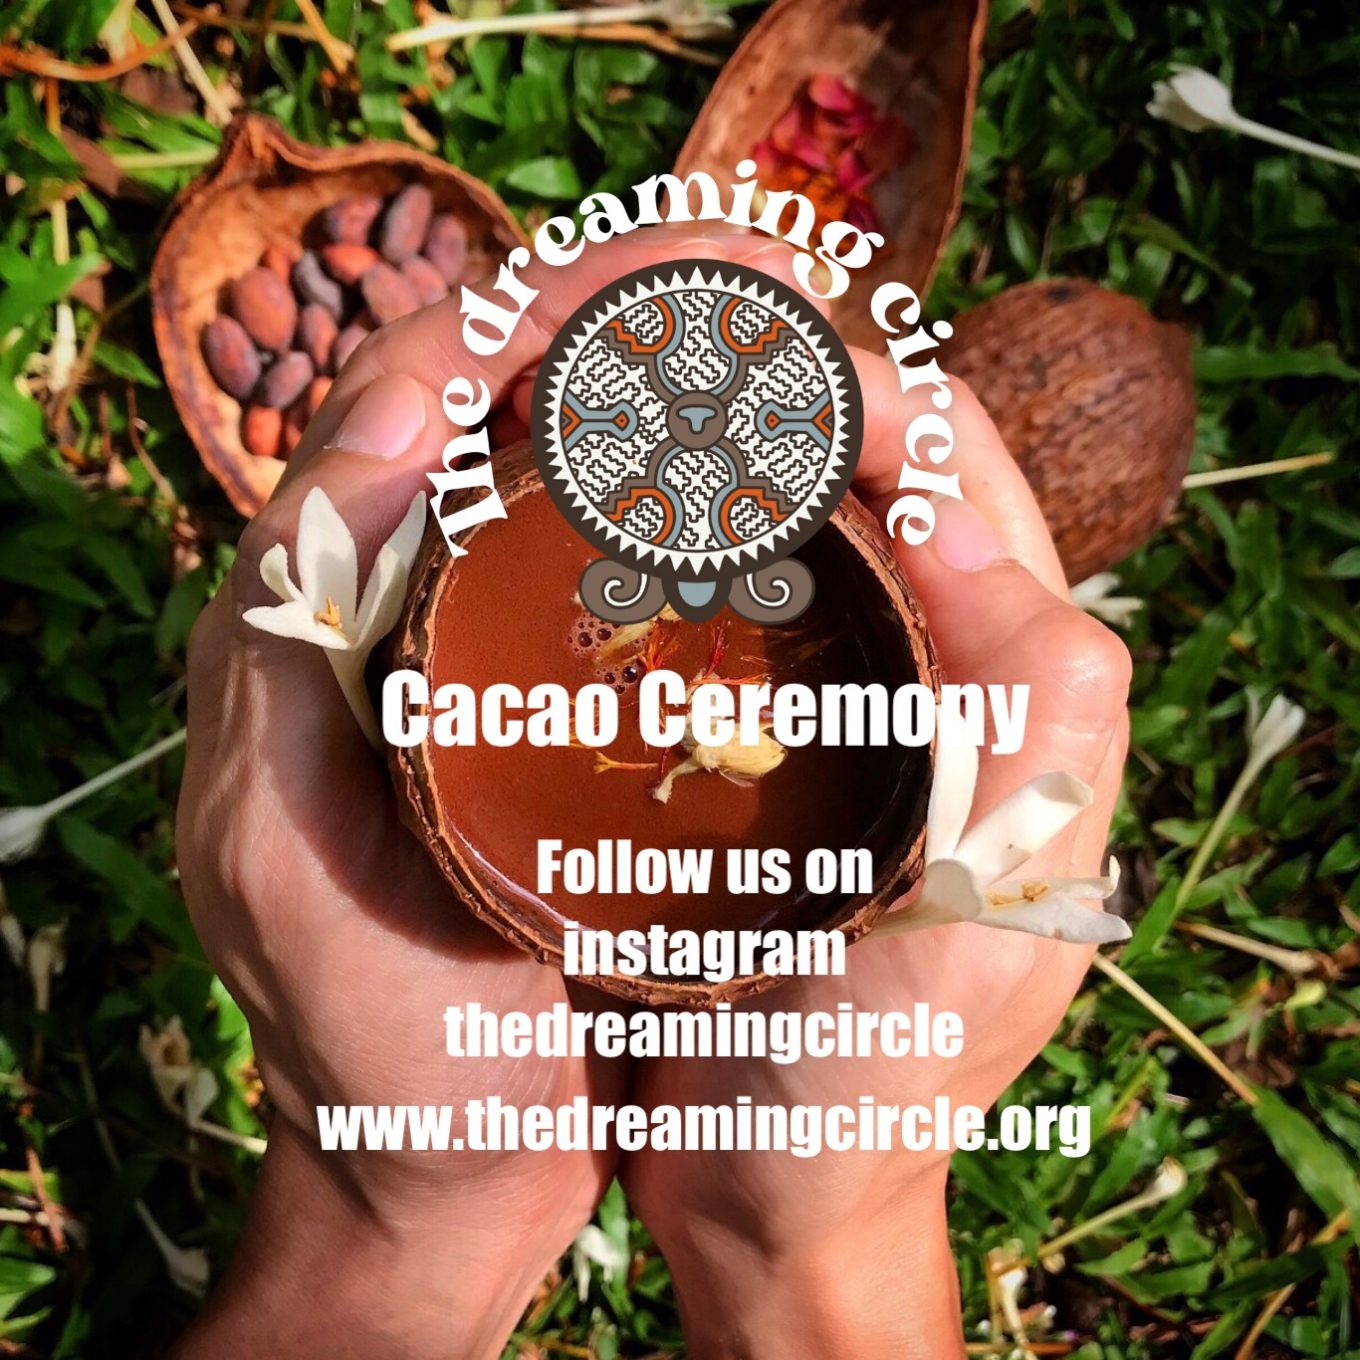 poster design for cacao ceremony featuring a pair of hands cupping a bowl of liquid with cacao seeds